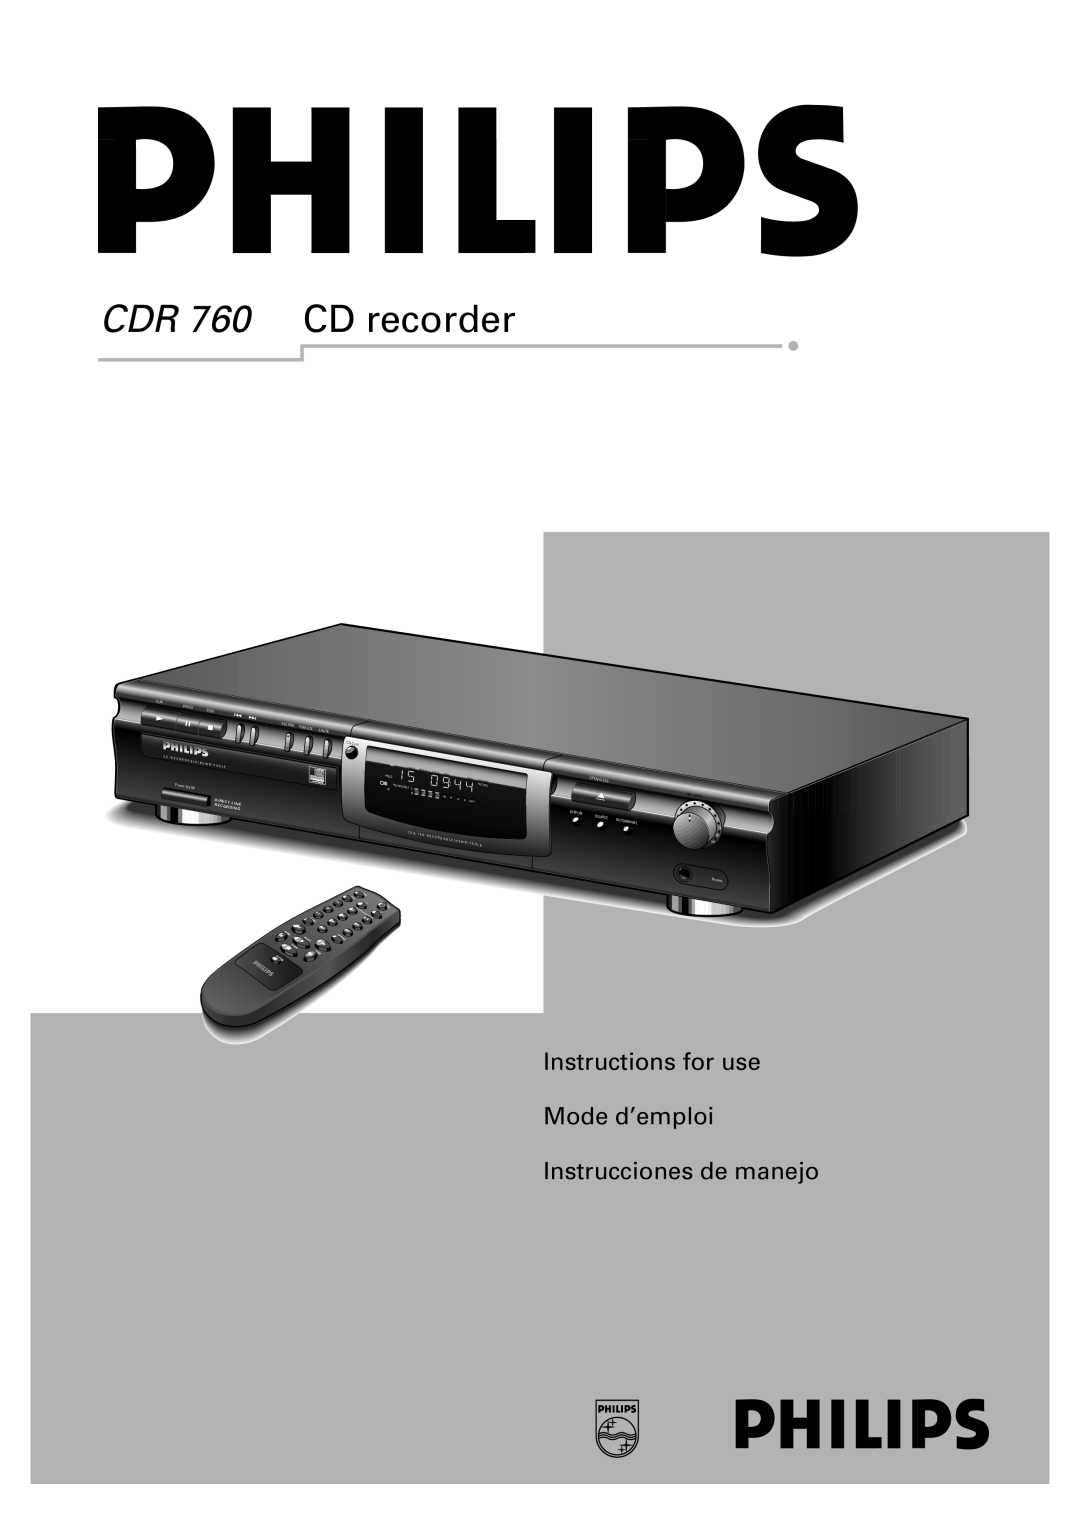 Philips manual CDR 760 CD recorder, Instructions for use Mode d’emploi, Instrucciones de manejo, Rect Liine, Recordiing 